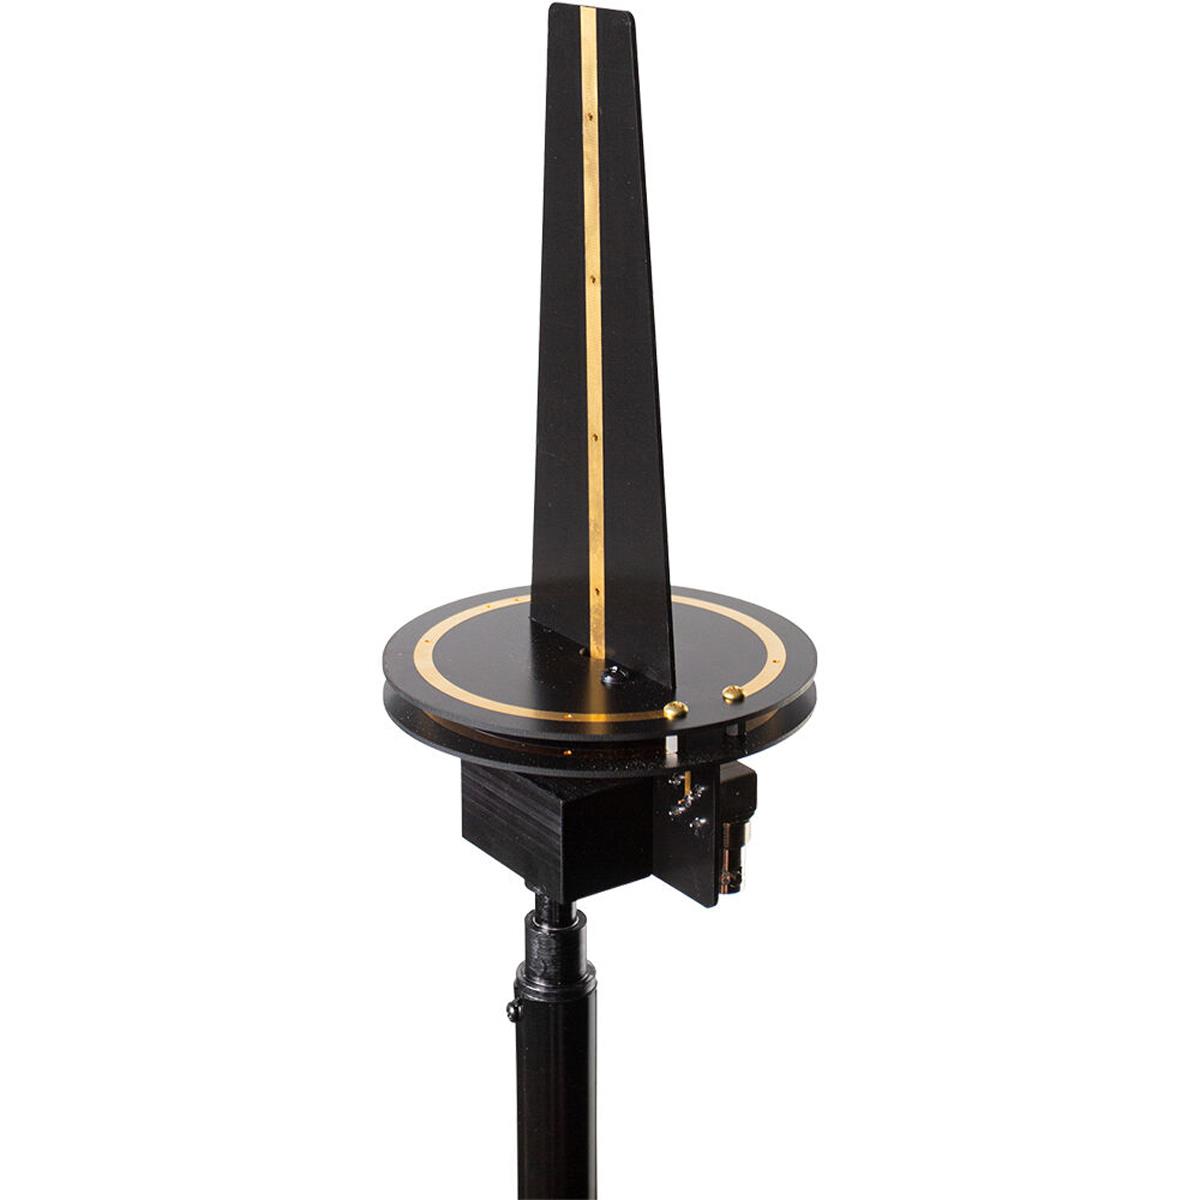 Image of RF Venue Diversity Omni Antenna for Wireless Microphones